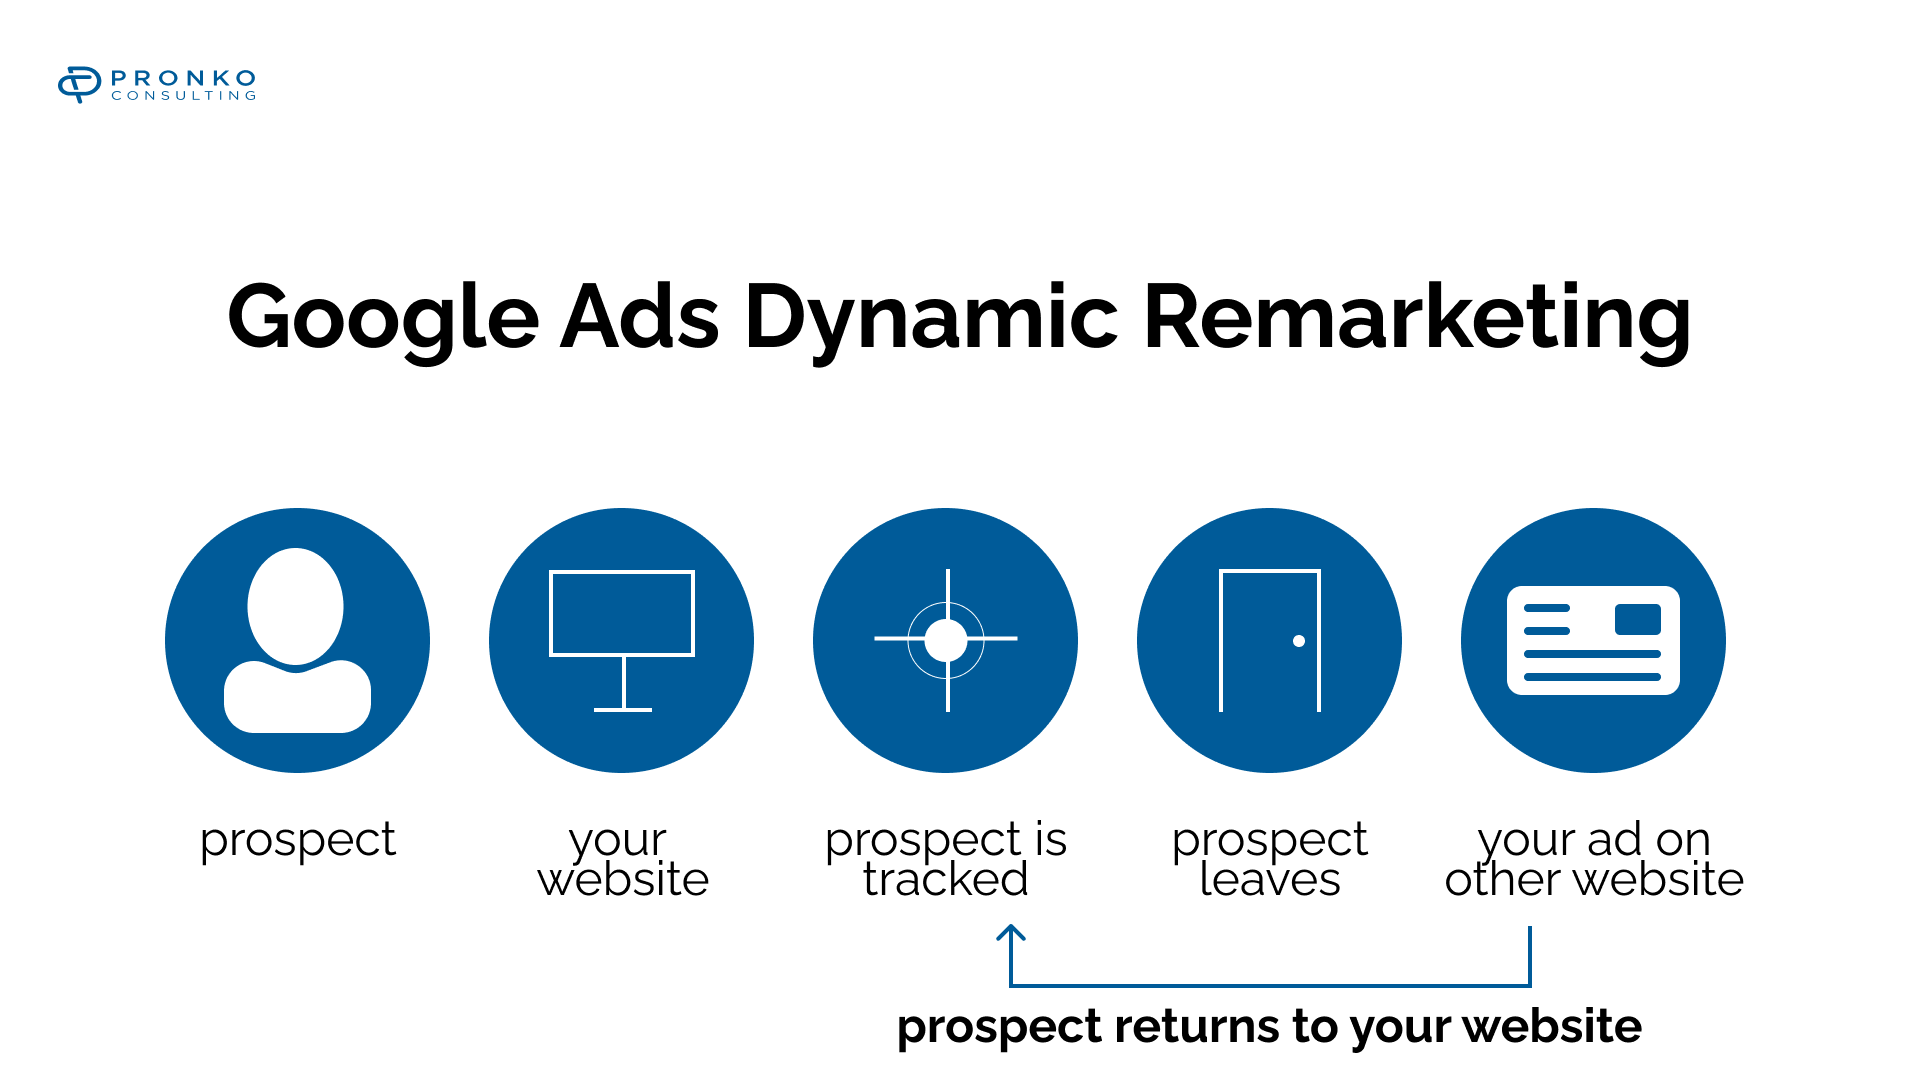 Why do you need Google Ads Dynamic Remarketing